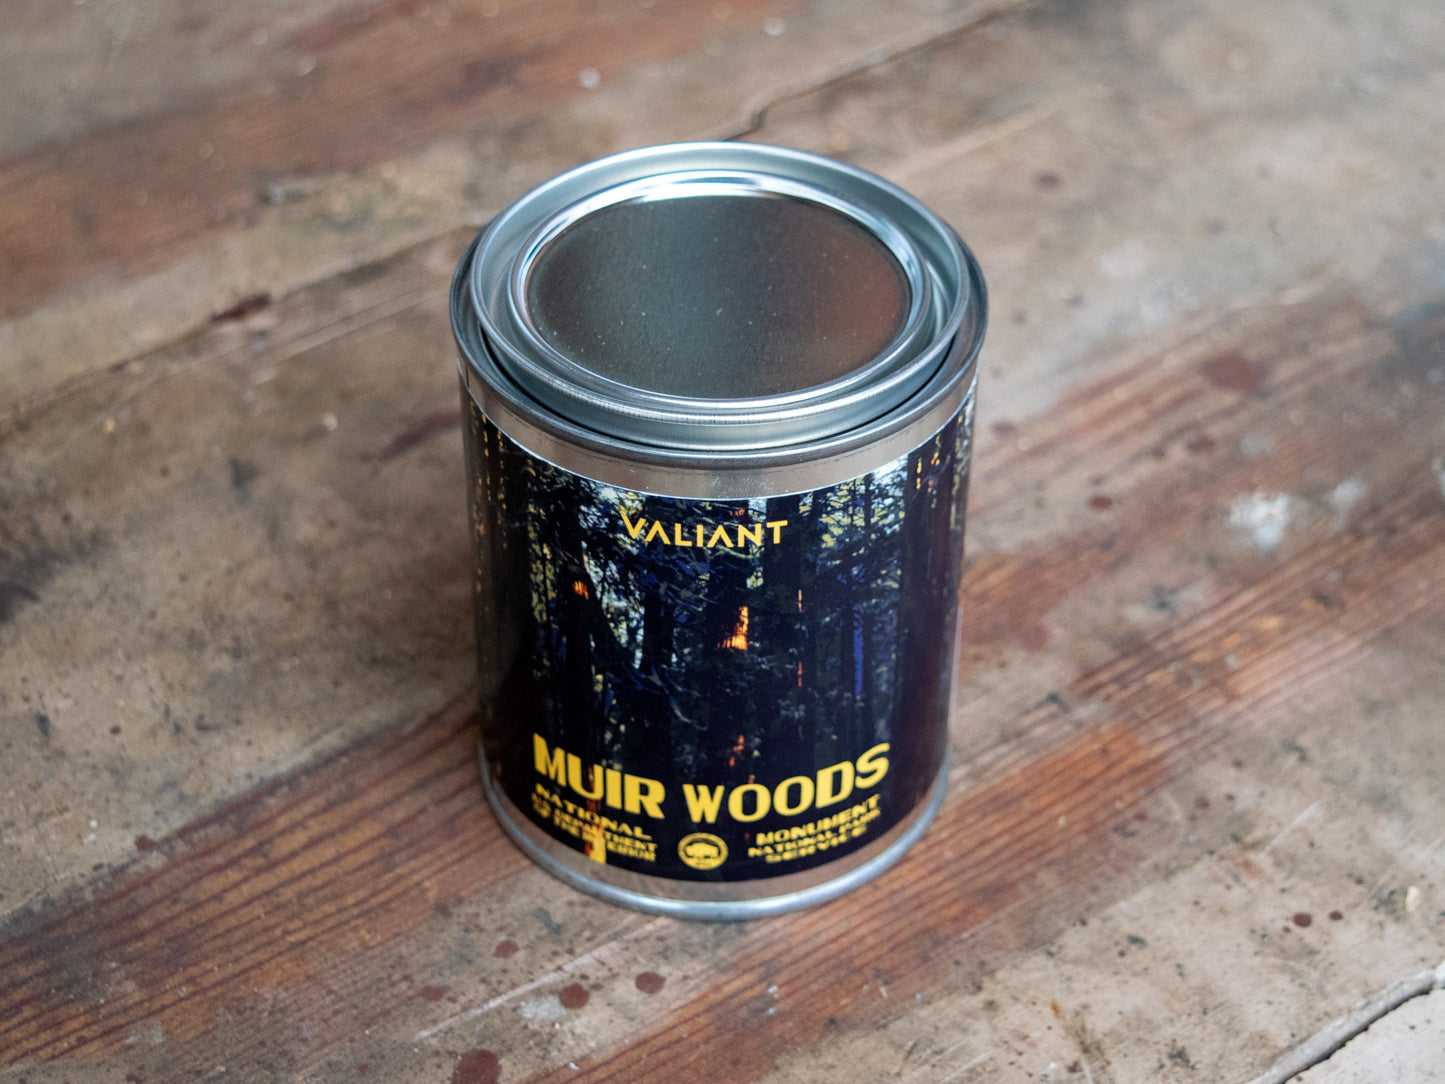 Muir Woods National Monument Candle